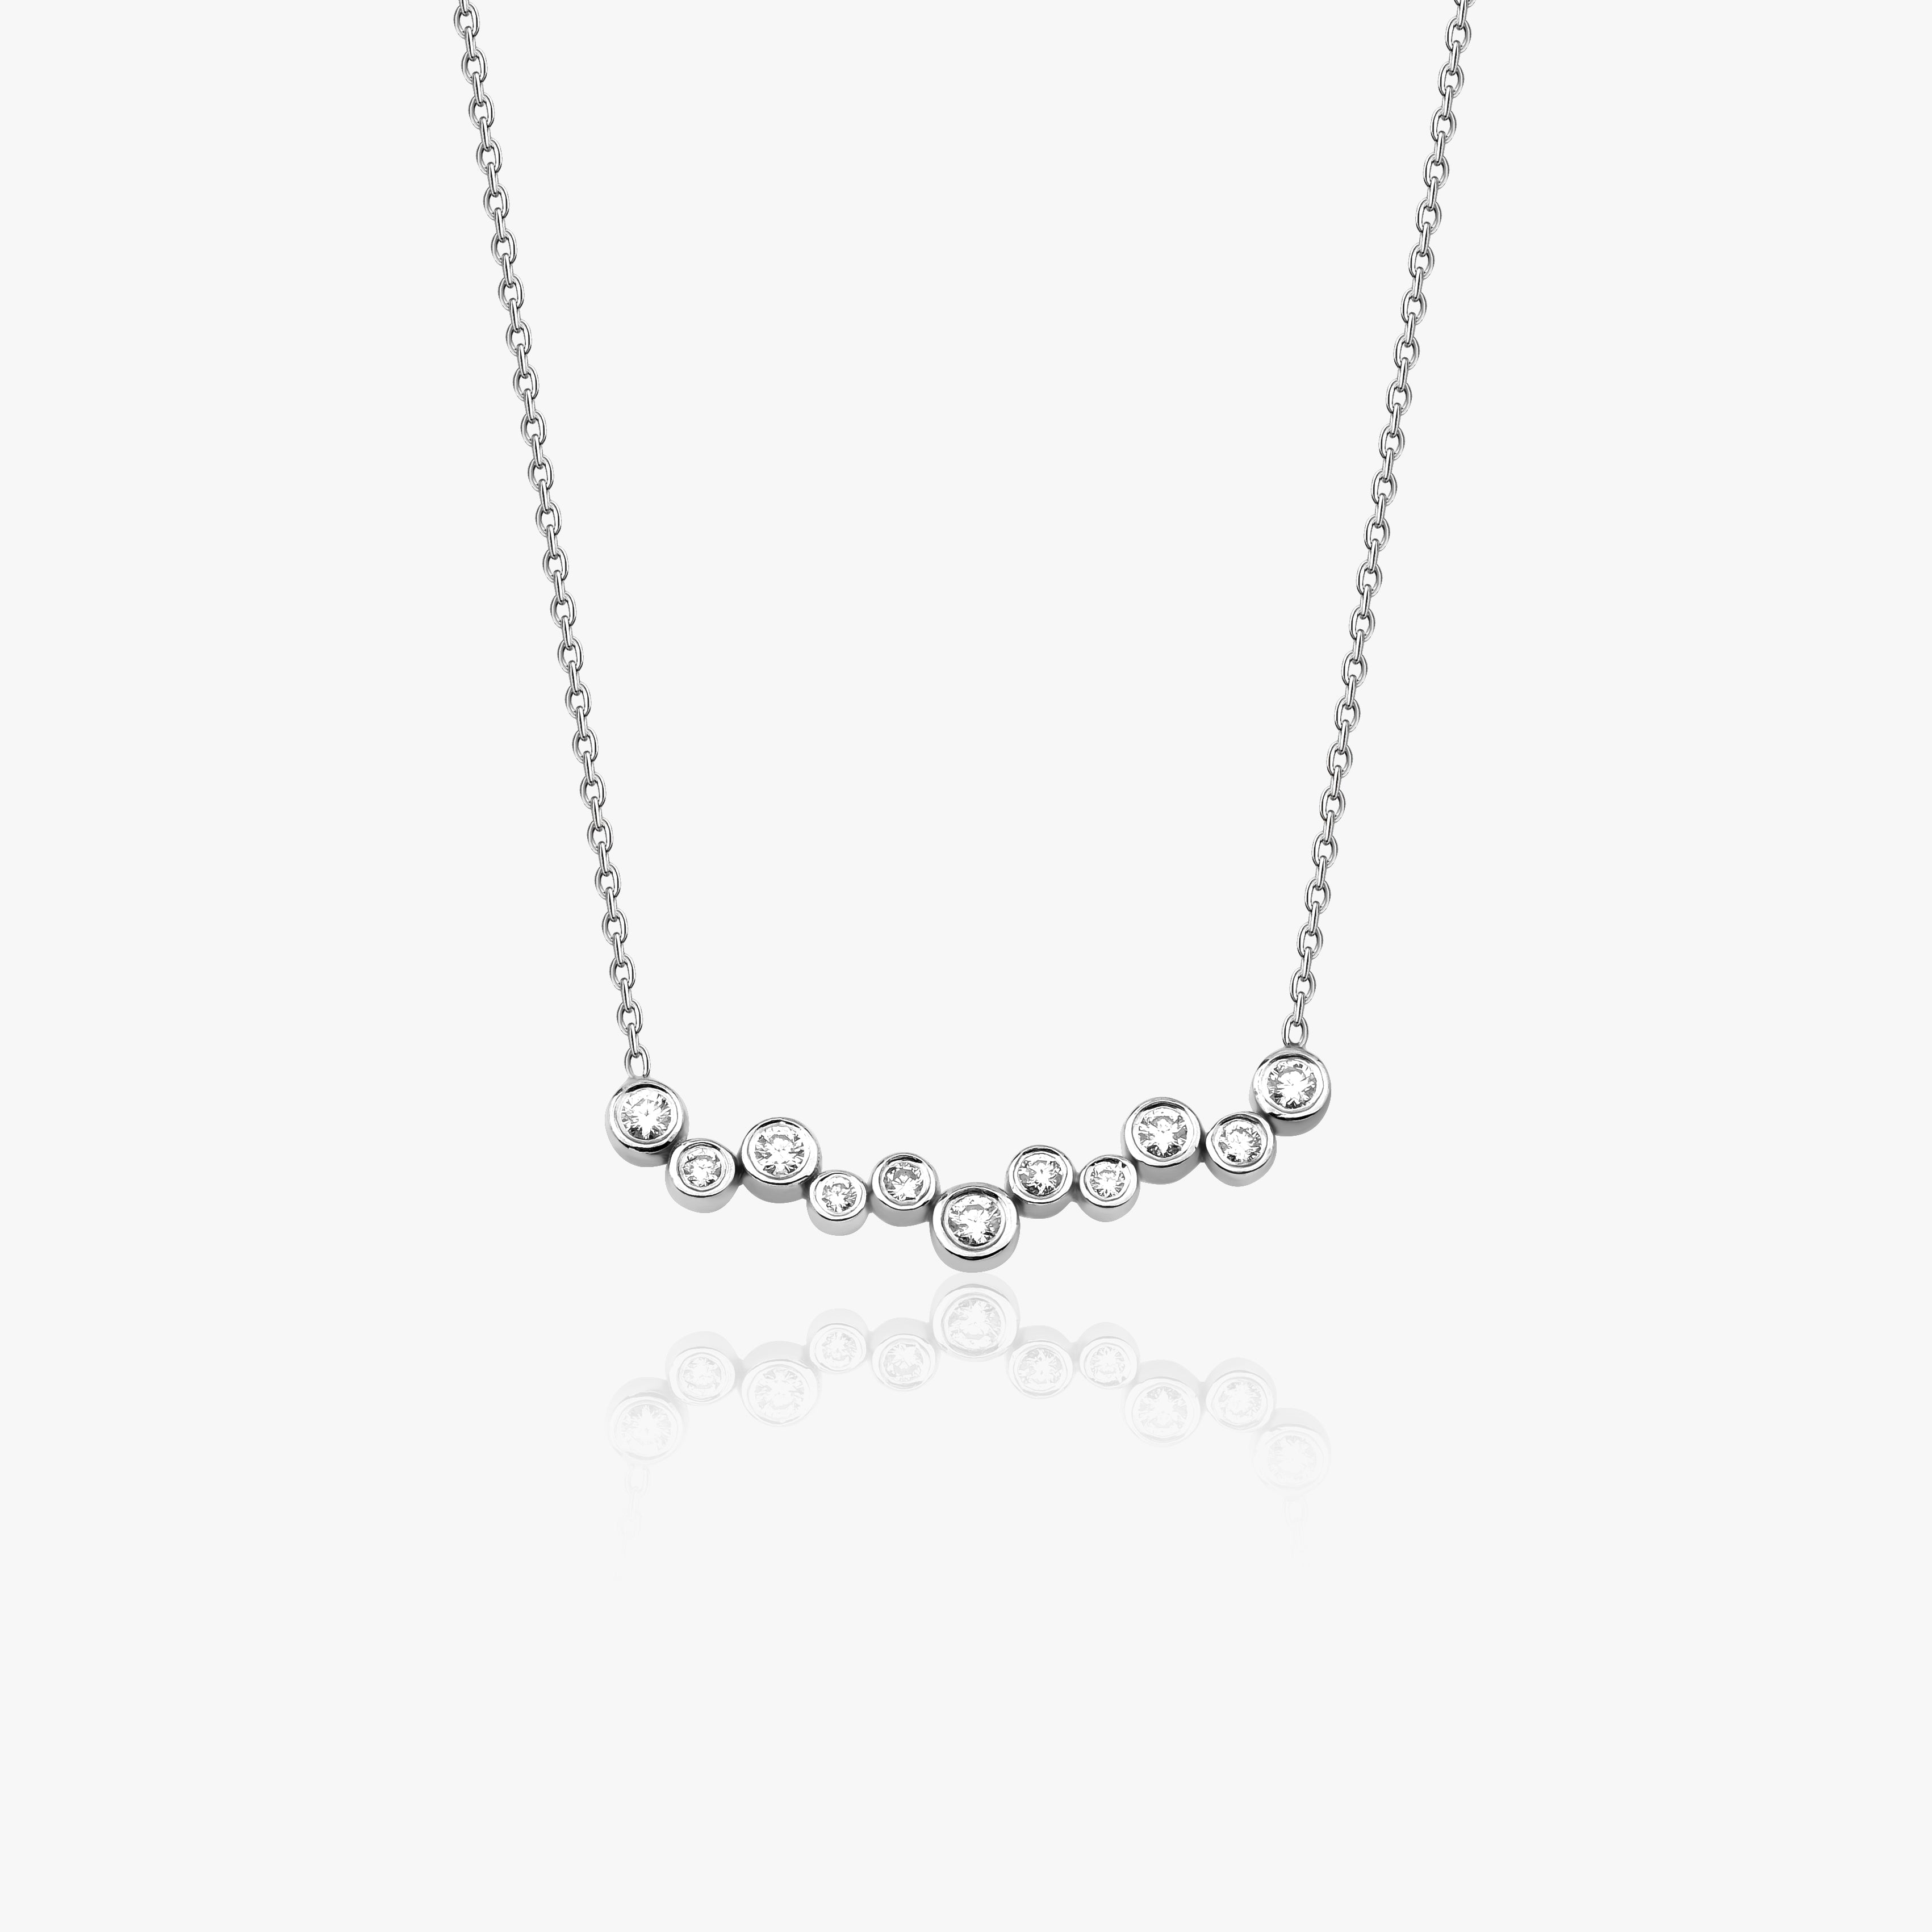 Bezel Set Diamond Bar Necklace Available in 14K and 18K Gold